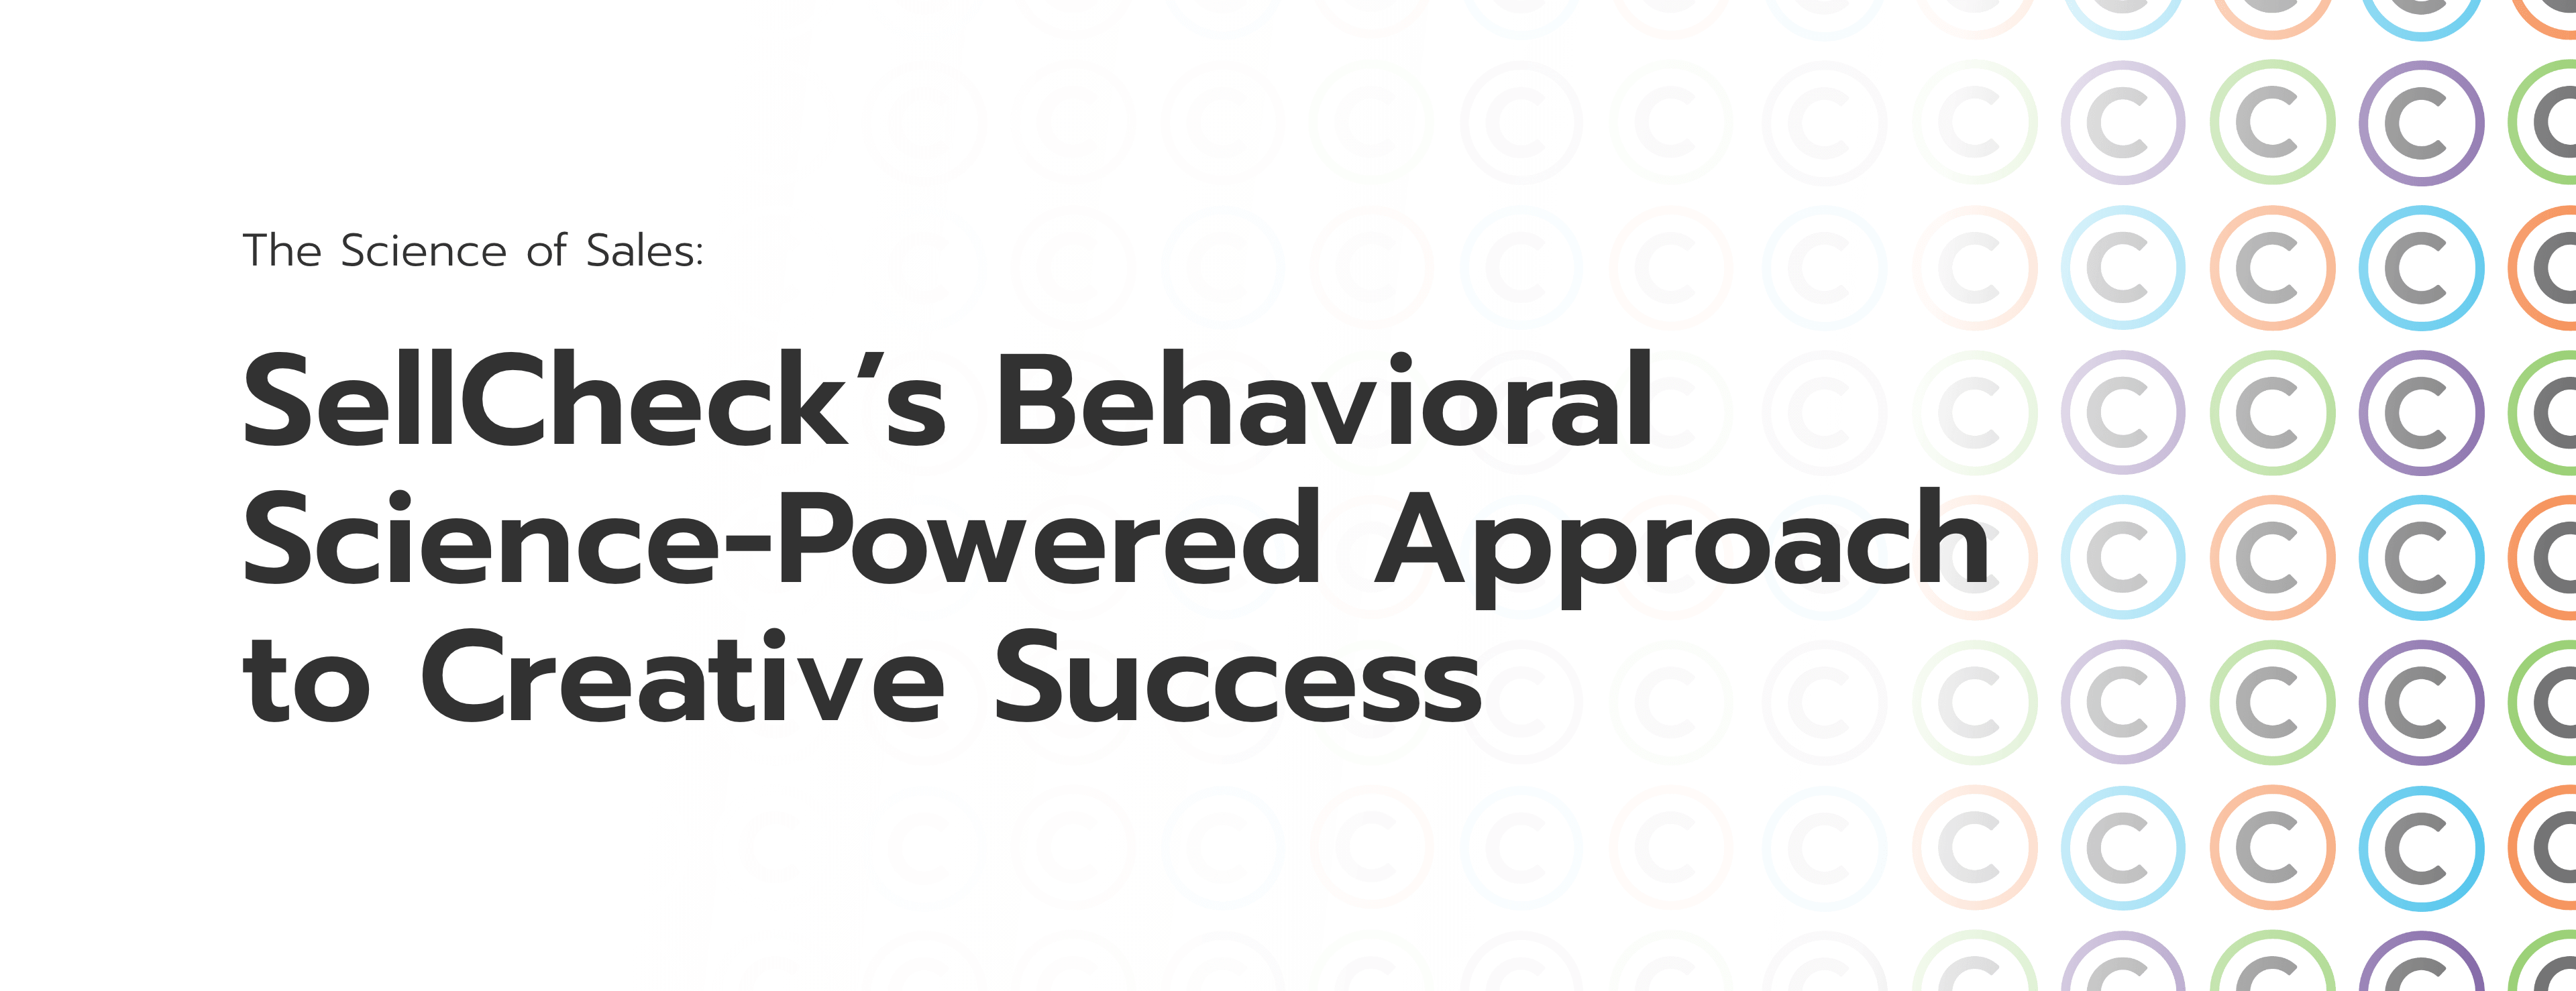 SellCheck’s Behavioral The Science of Sales Science-Powered Approach to Creative Success